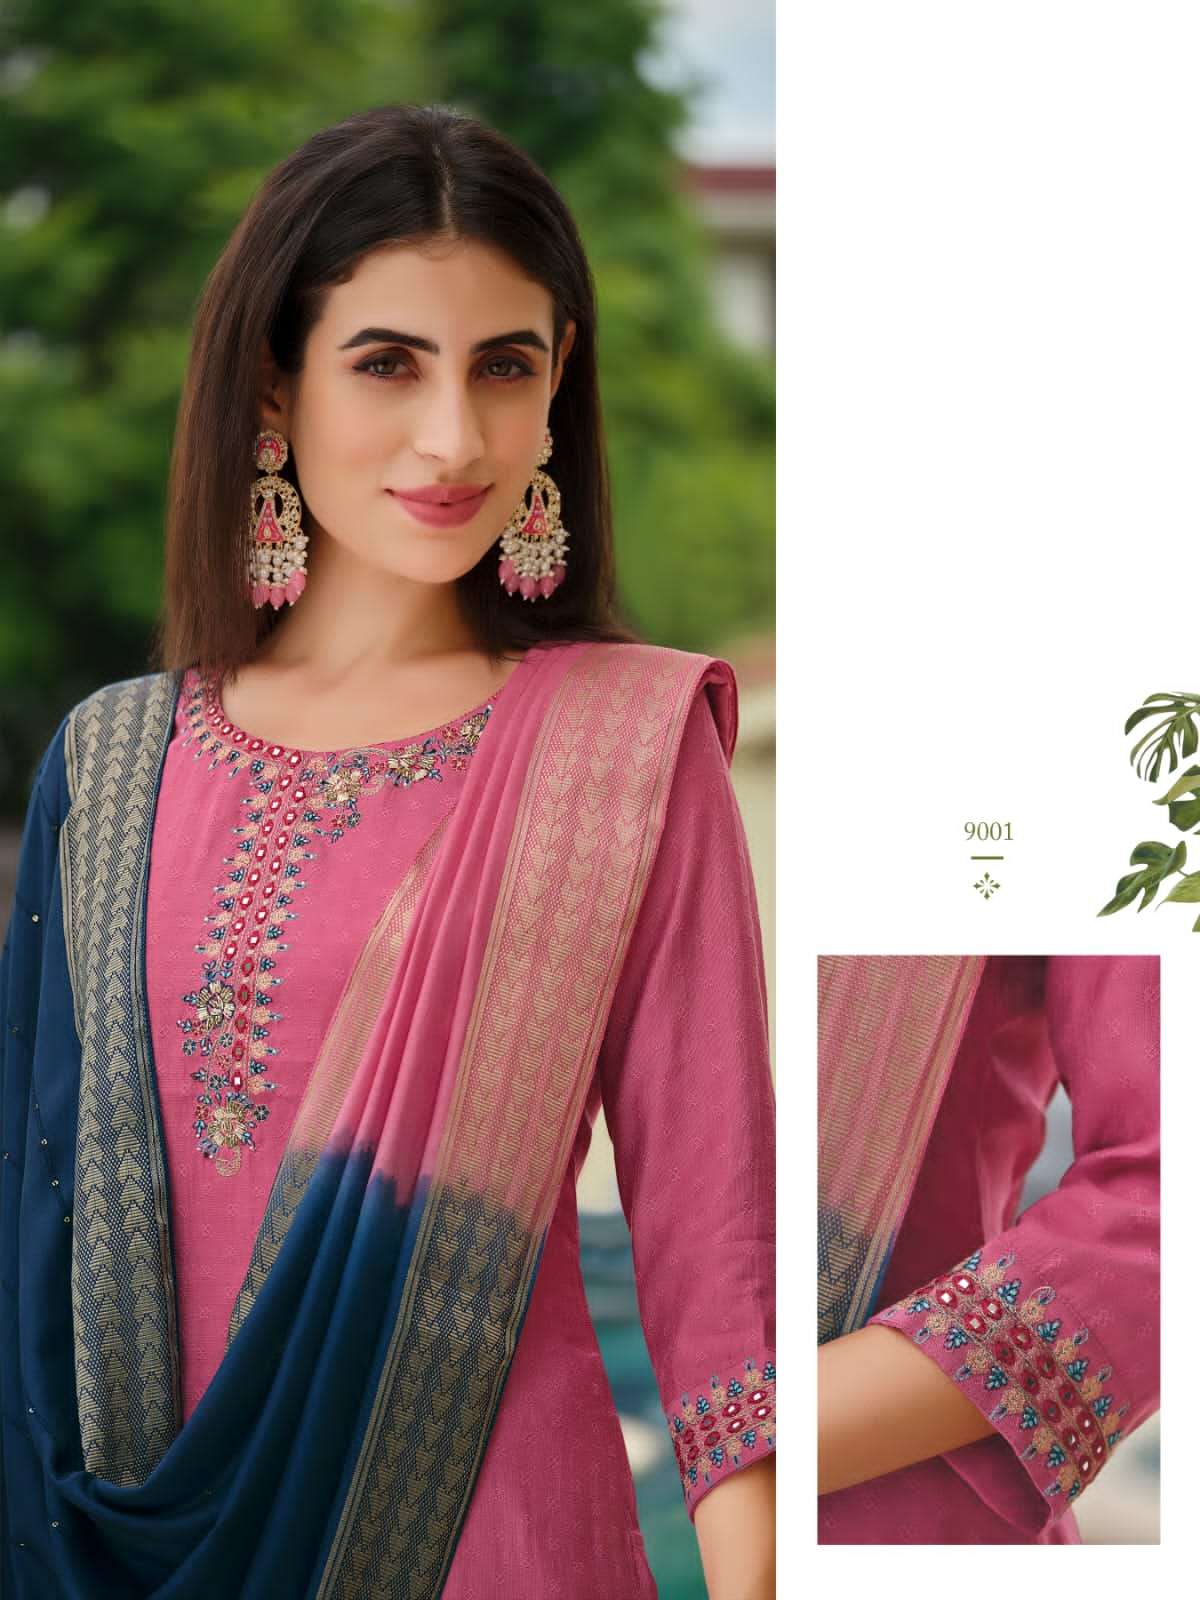 nora 9001-9006 series by karissa viscose silk fancy readymade collection wholesale price surat